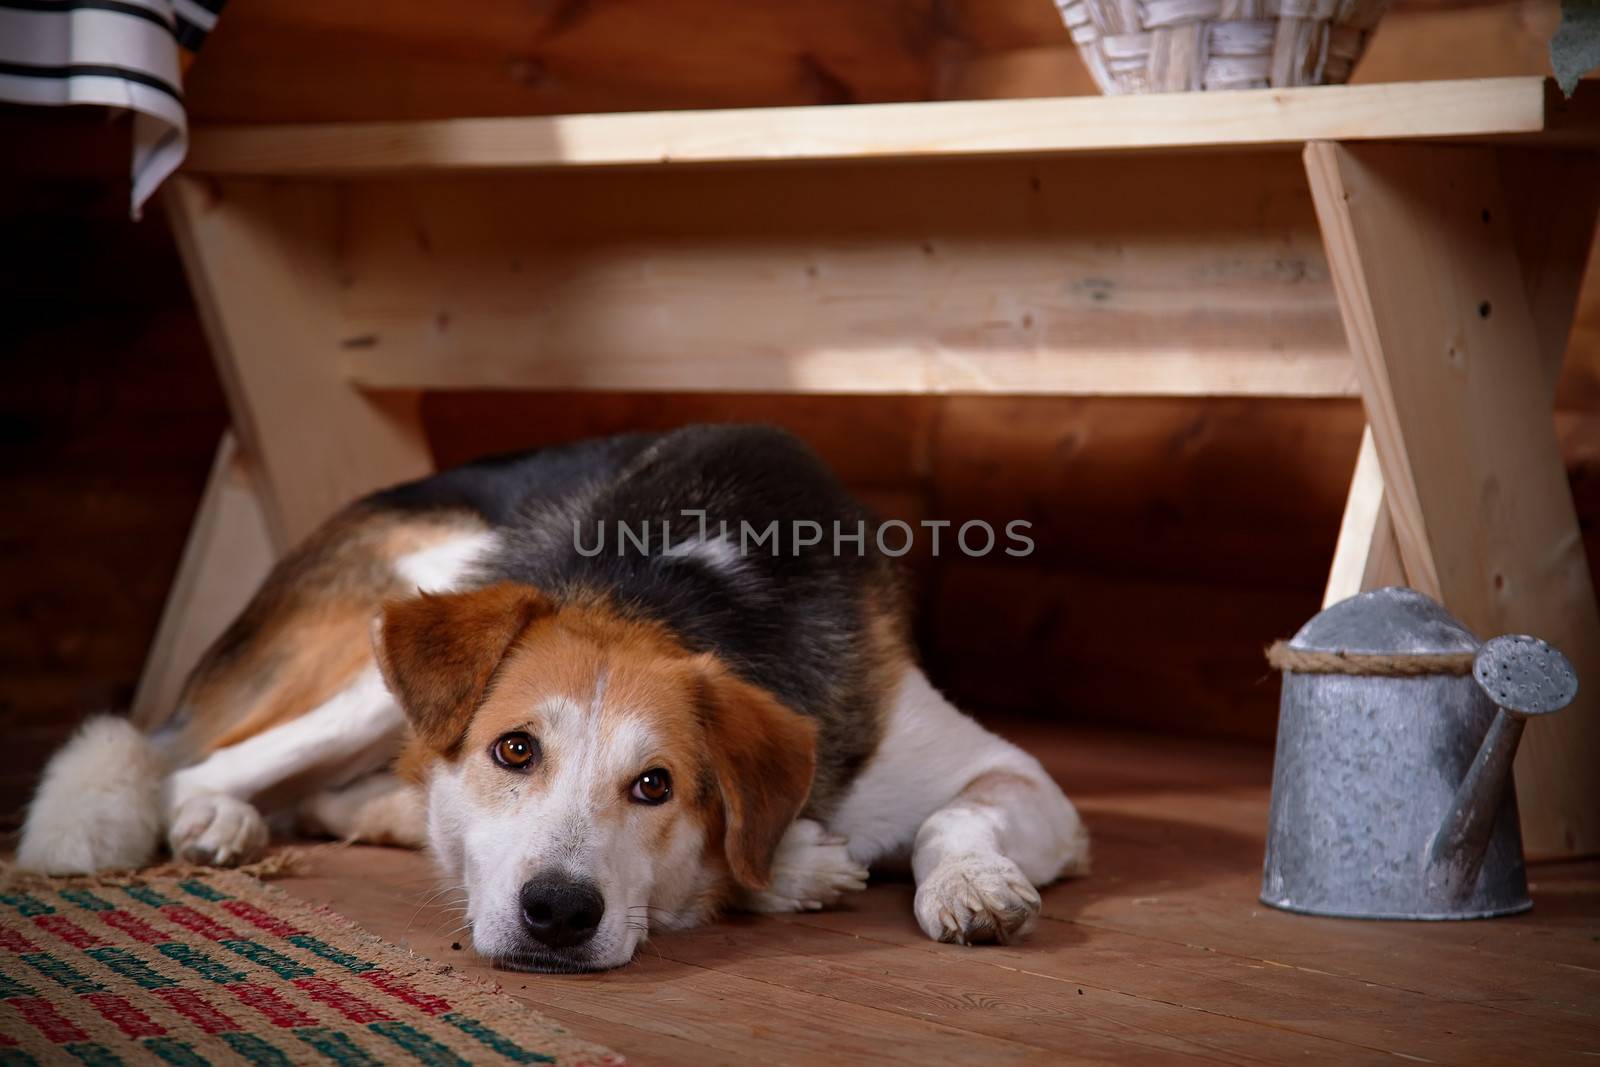 The sad dog lies under a bench in the rural house. Not purebred house dog.